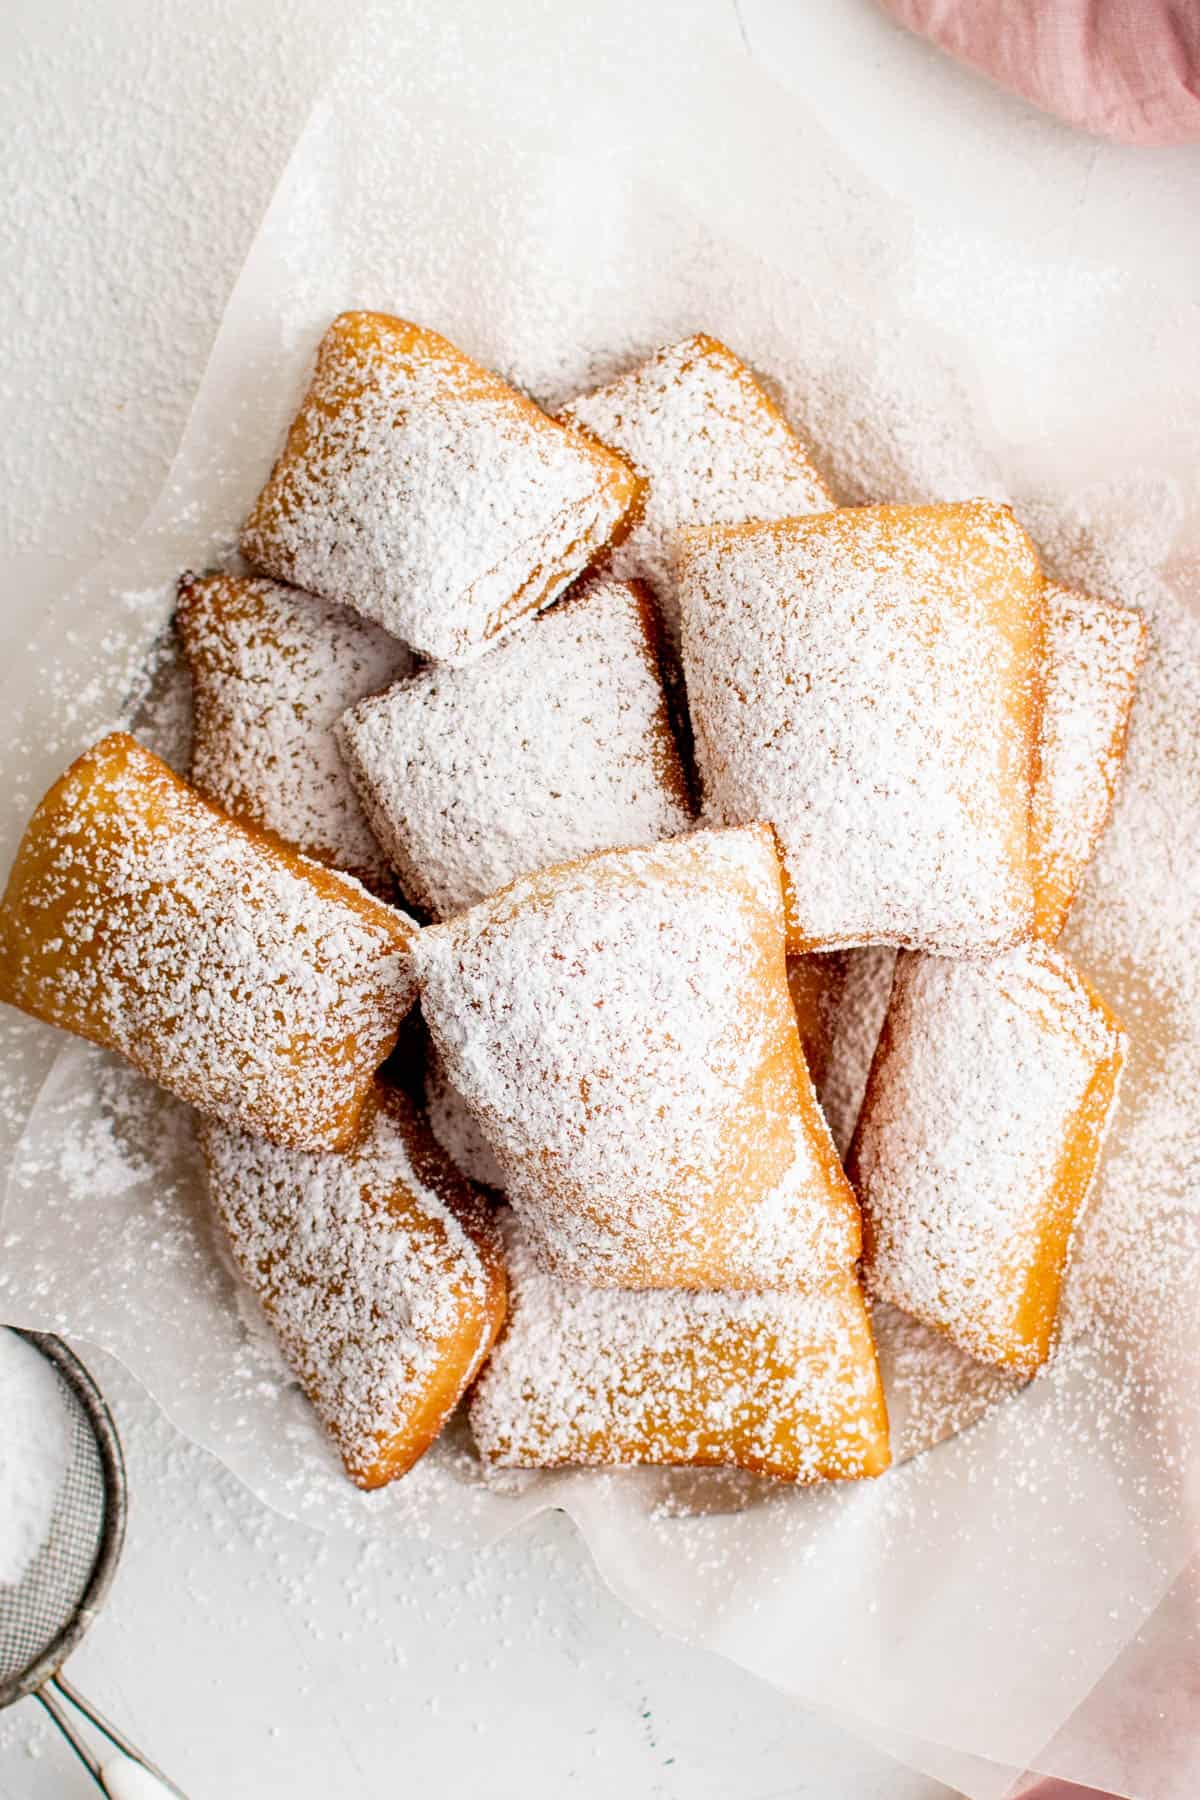 A large pile of sugar dusted beignets sitting on a piece of parchment paper.